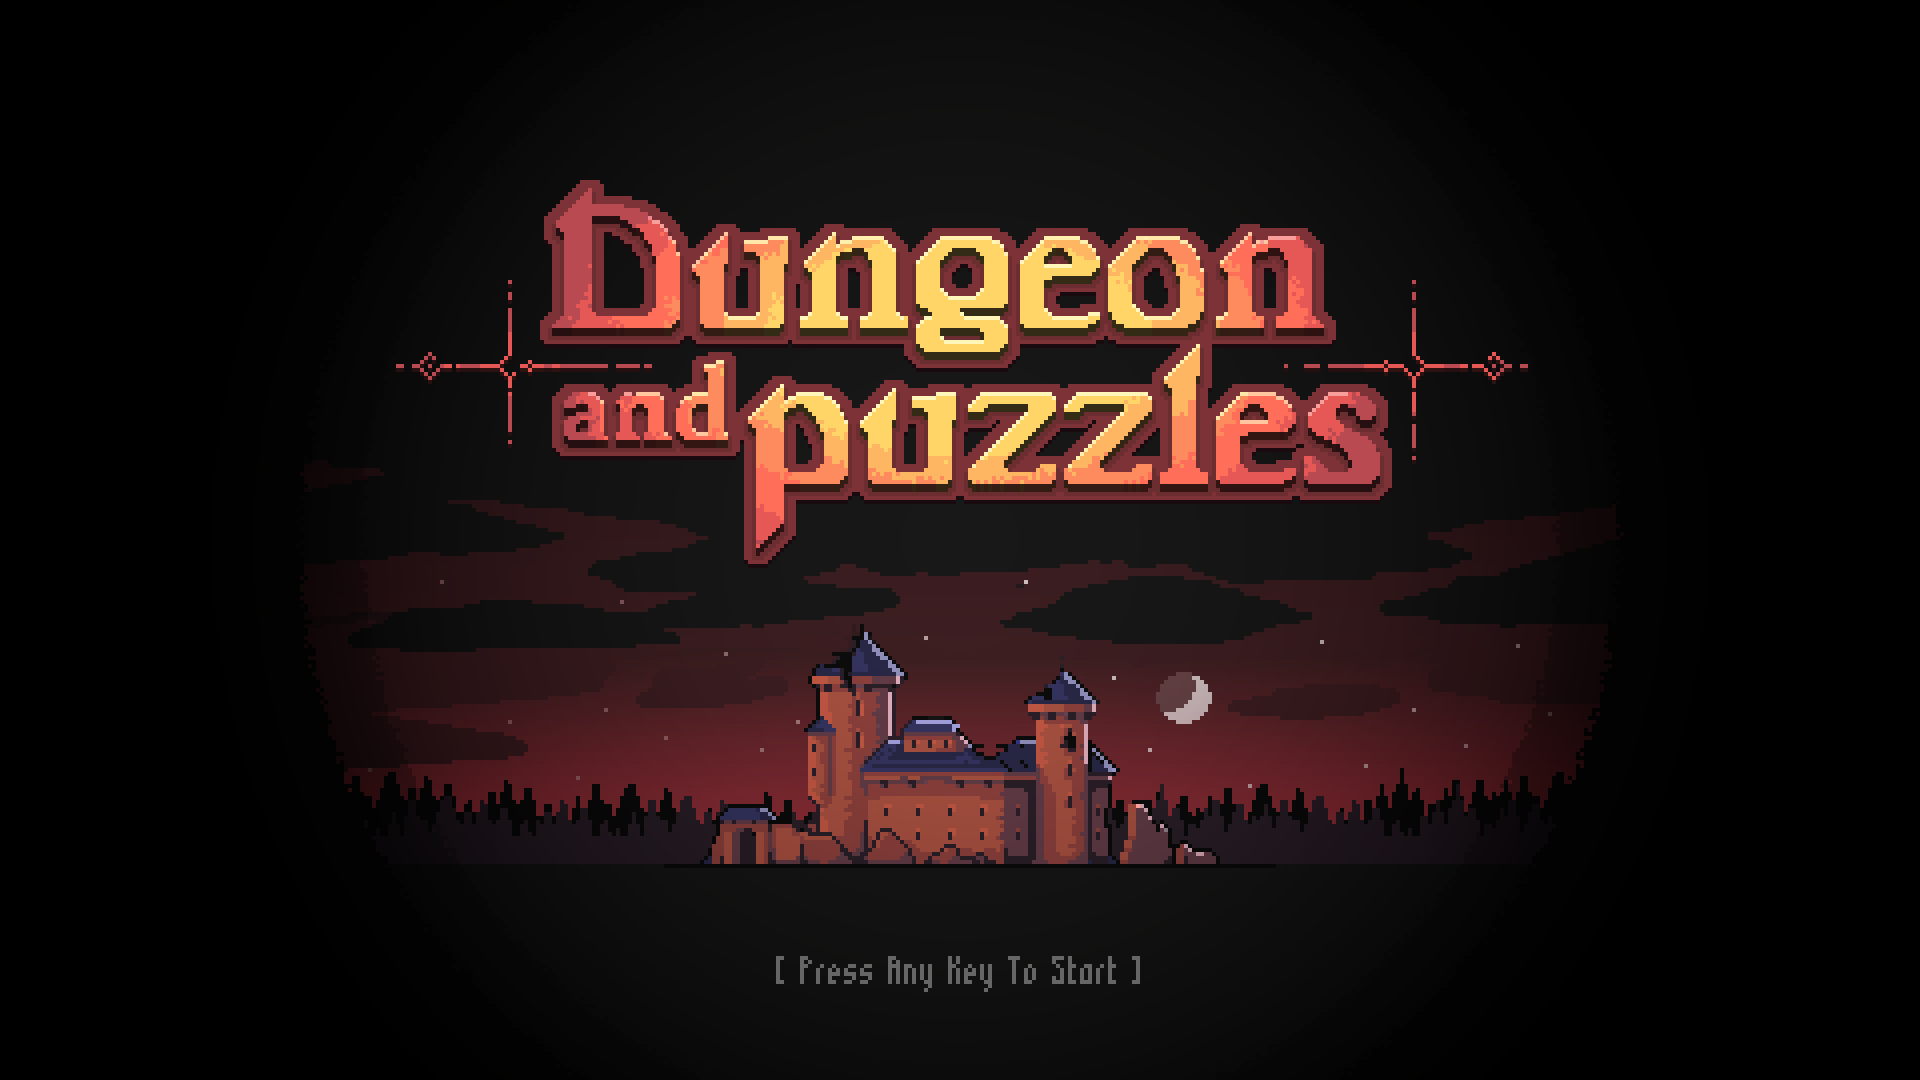 Dungeon and Puzzles Final Demo